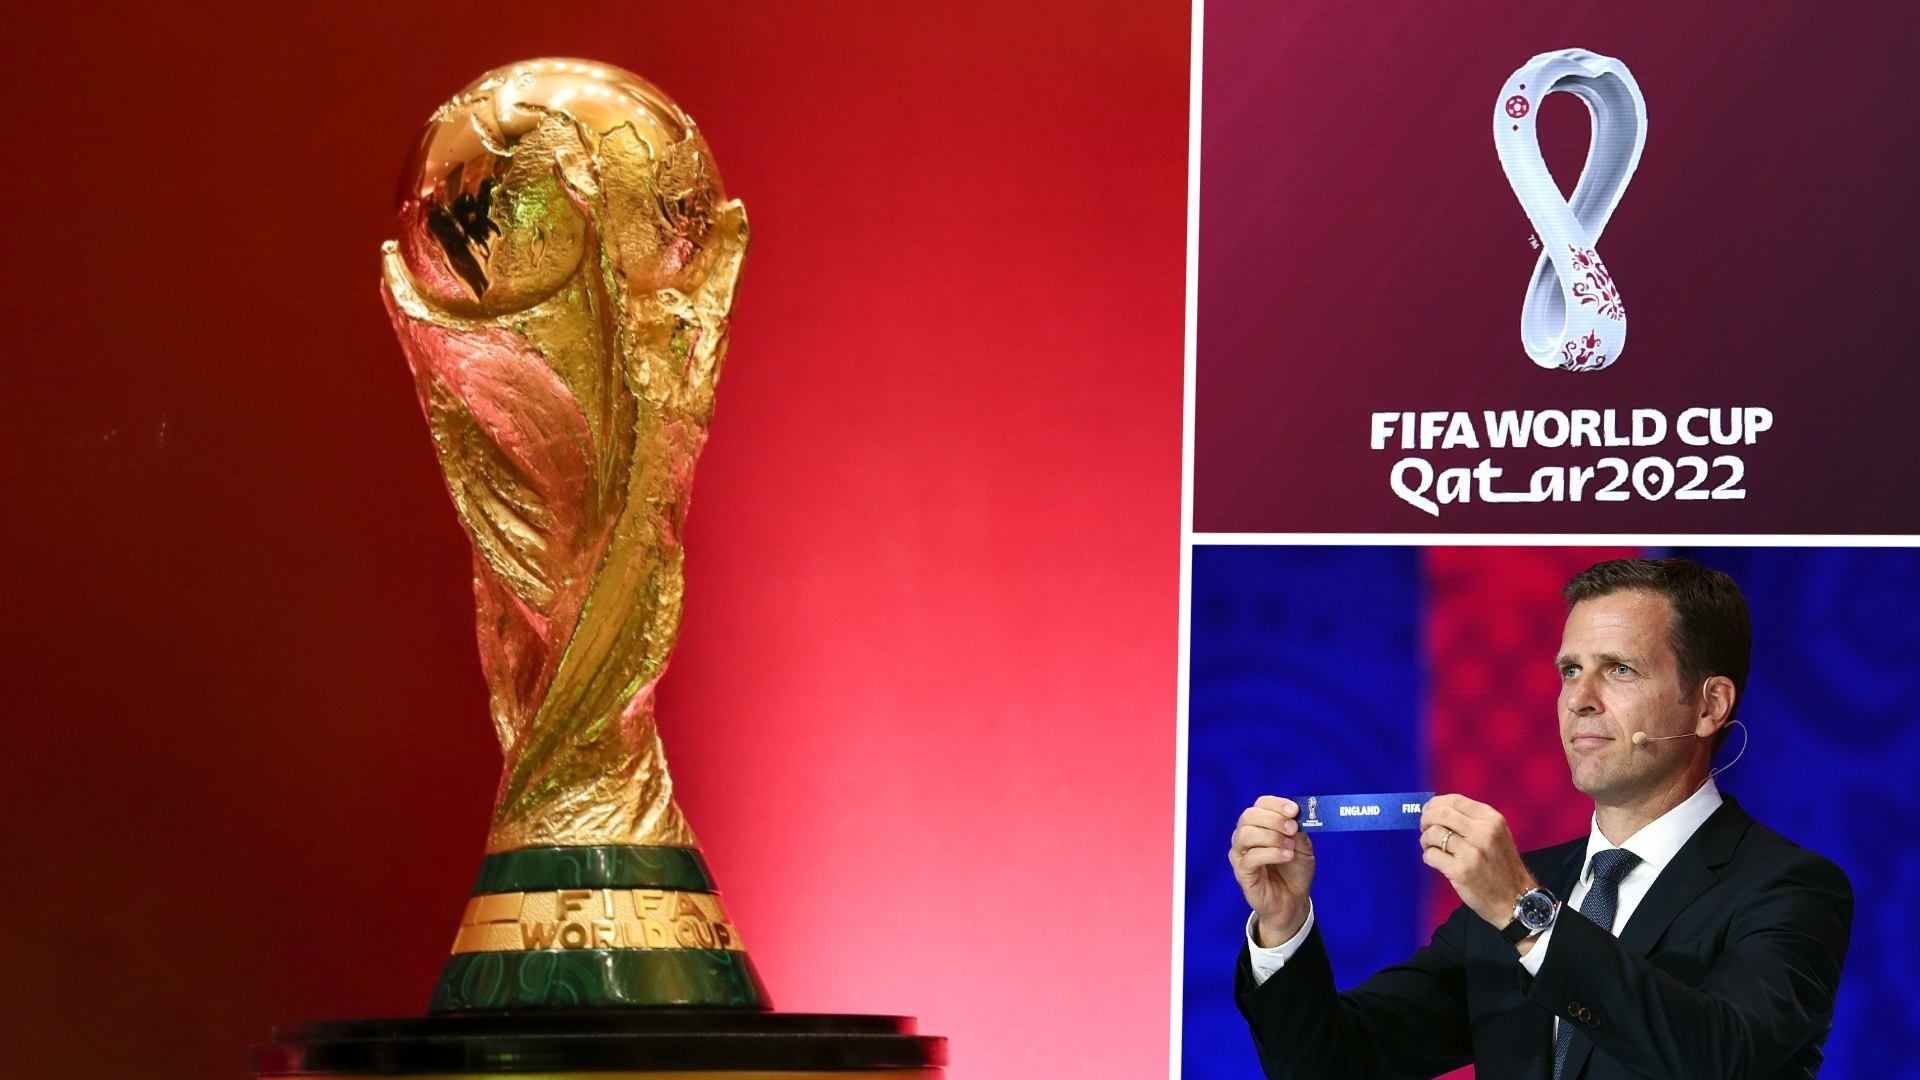 World Cup 2022 group stage draw: When, how to watch and stream live, plus seeding pots. Goal.com US